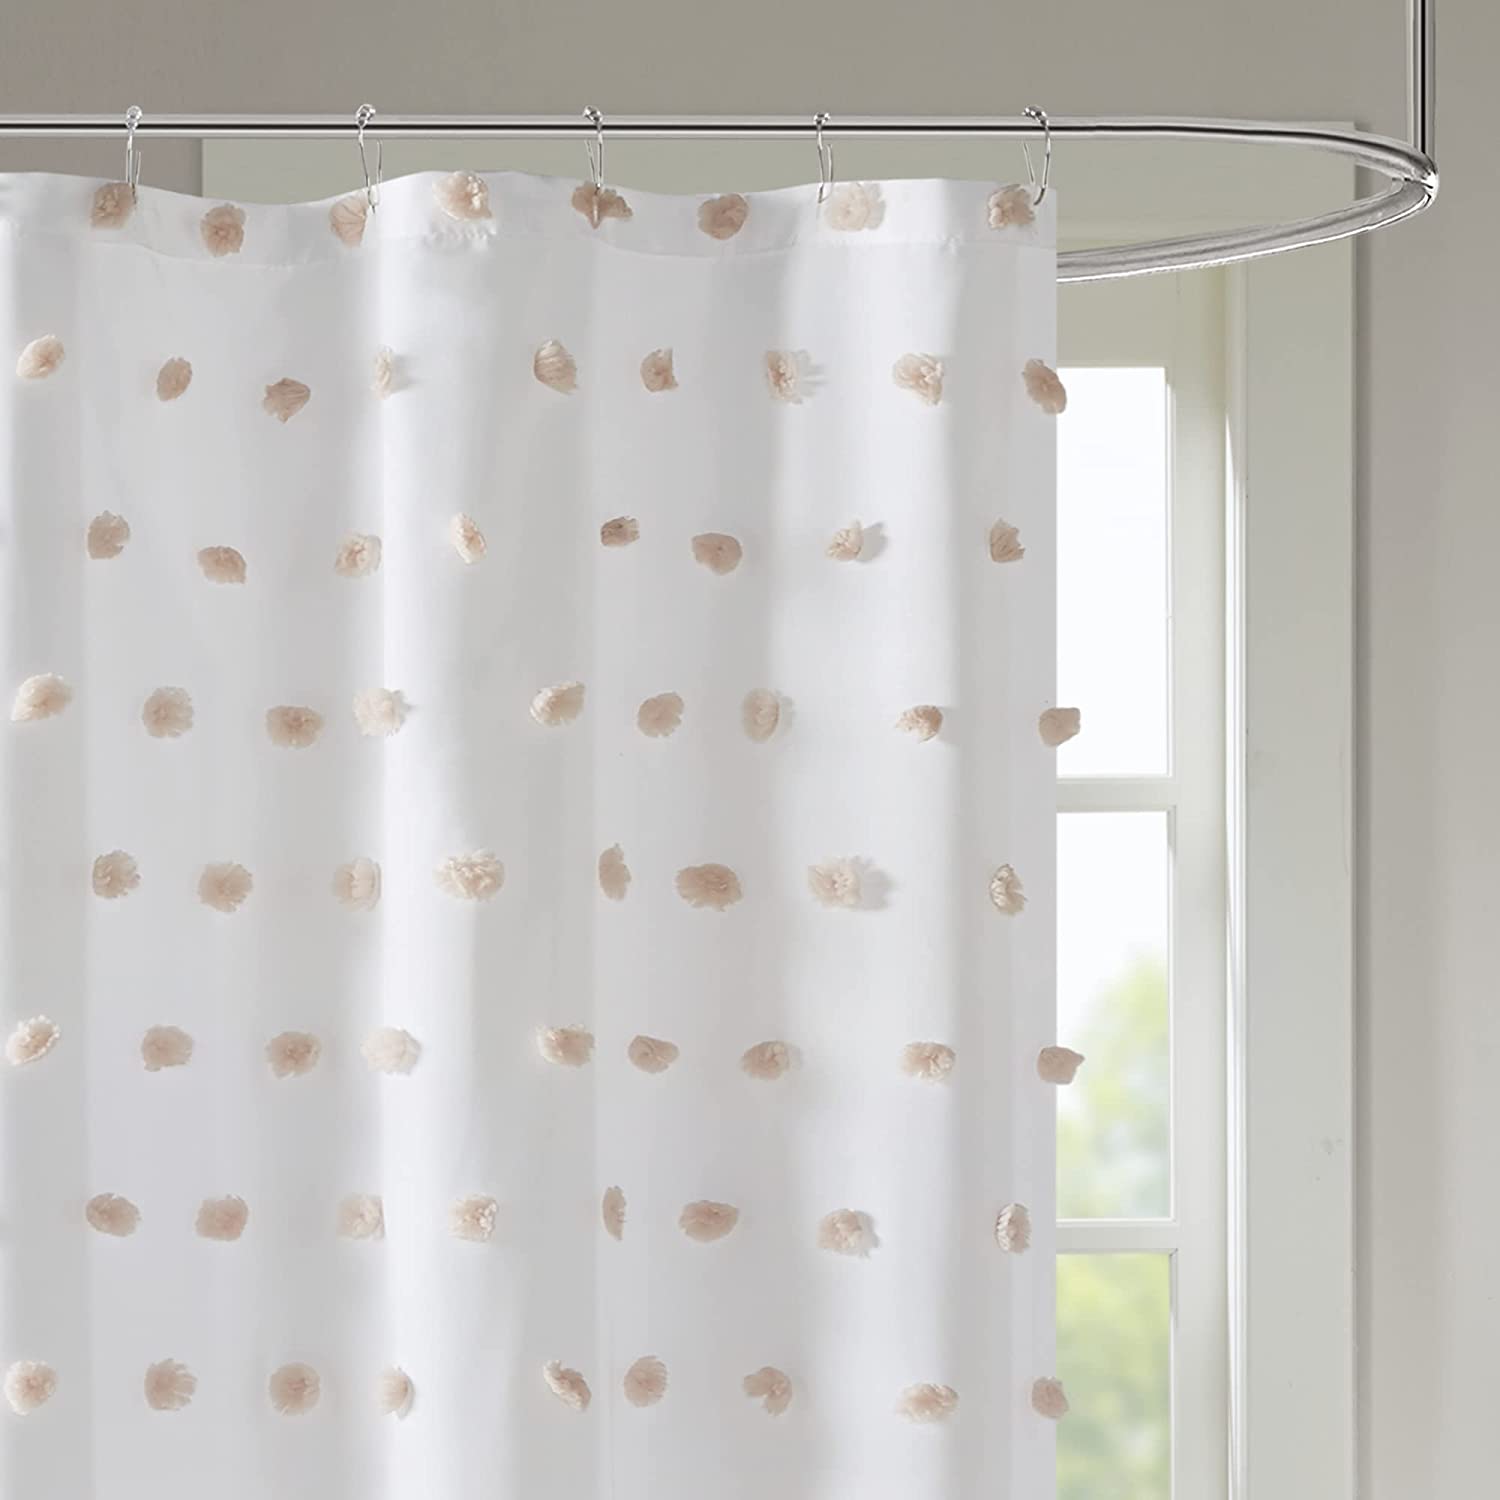 Madison Park Shower Curtain with Textured Pom-Poms $25.19+ Free Shipping for Prime or on $25+